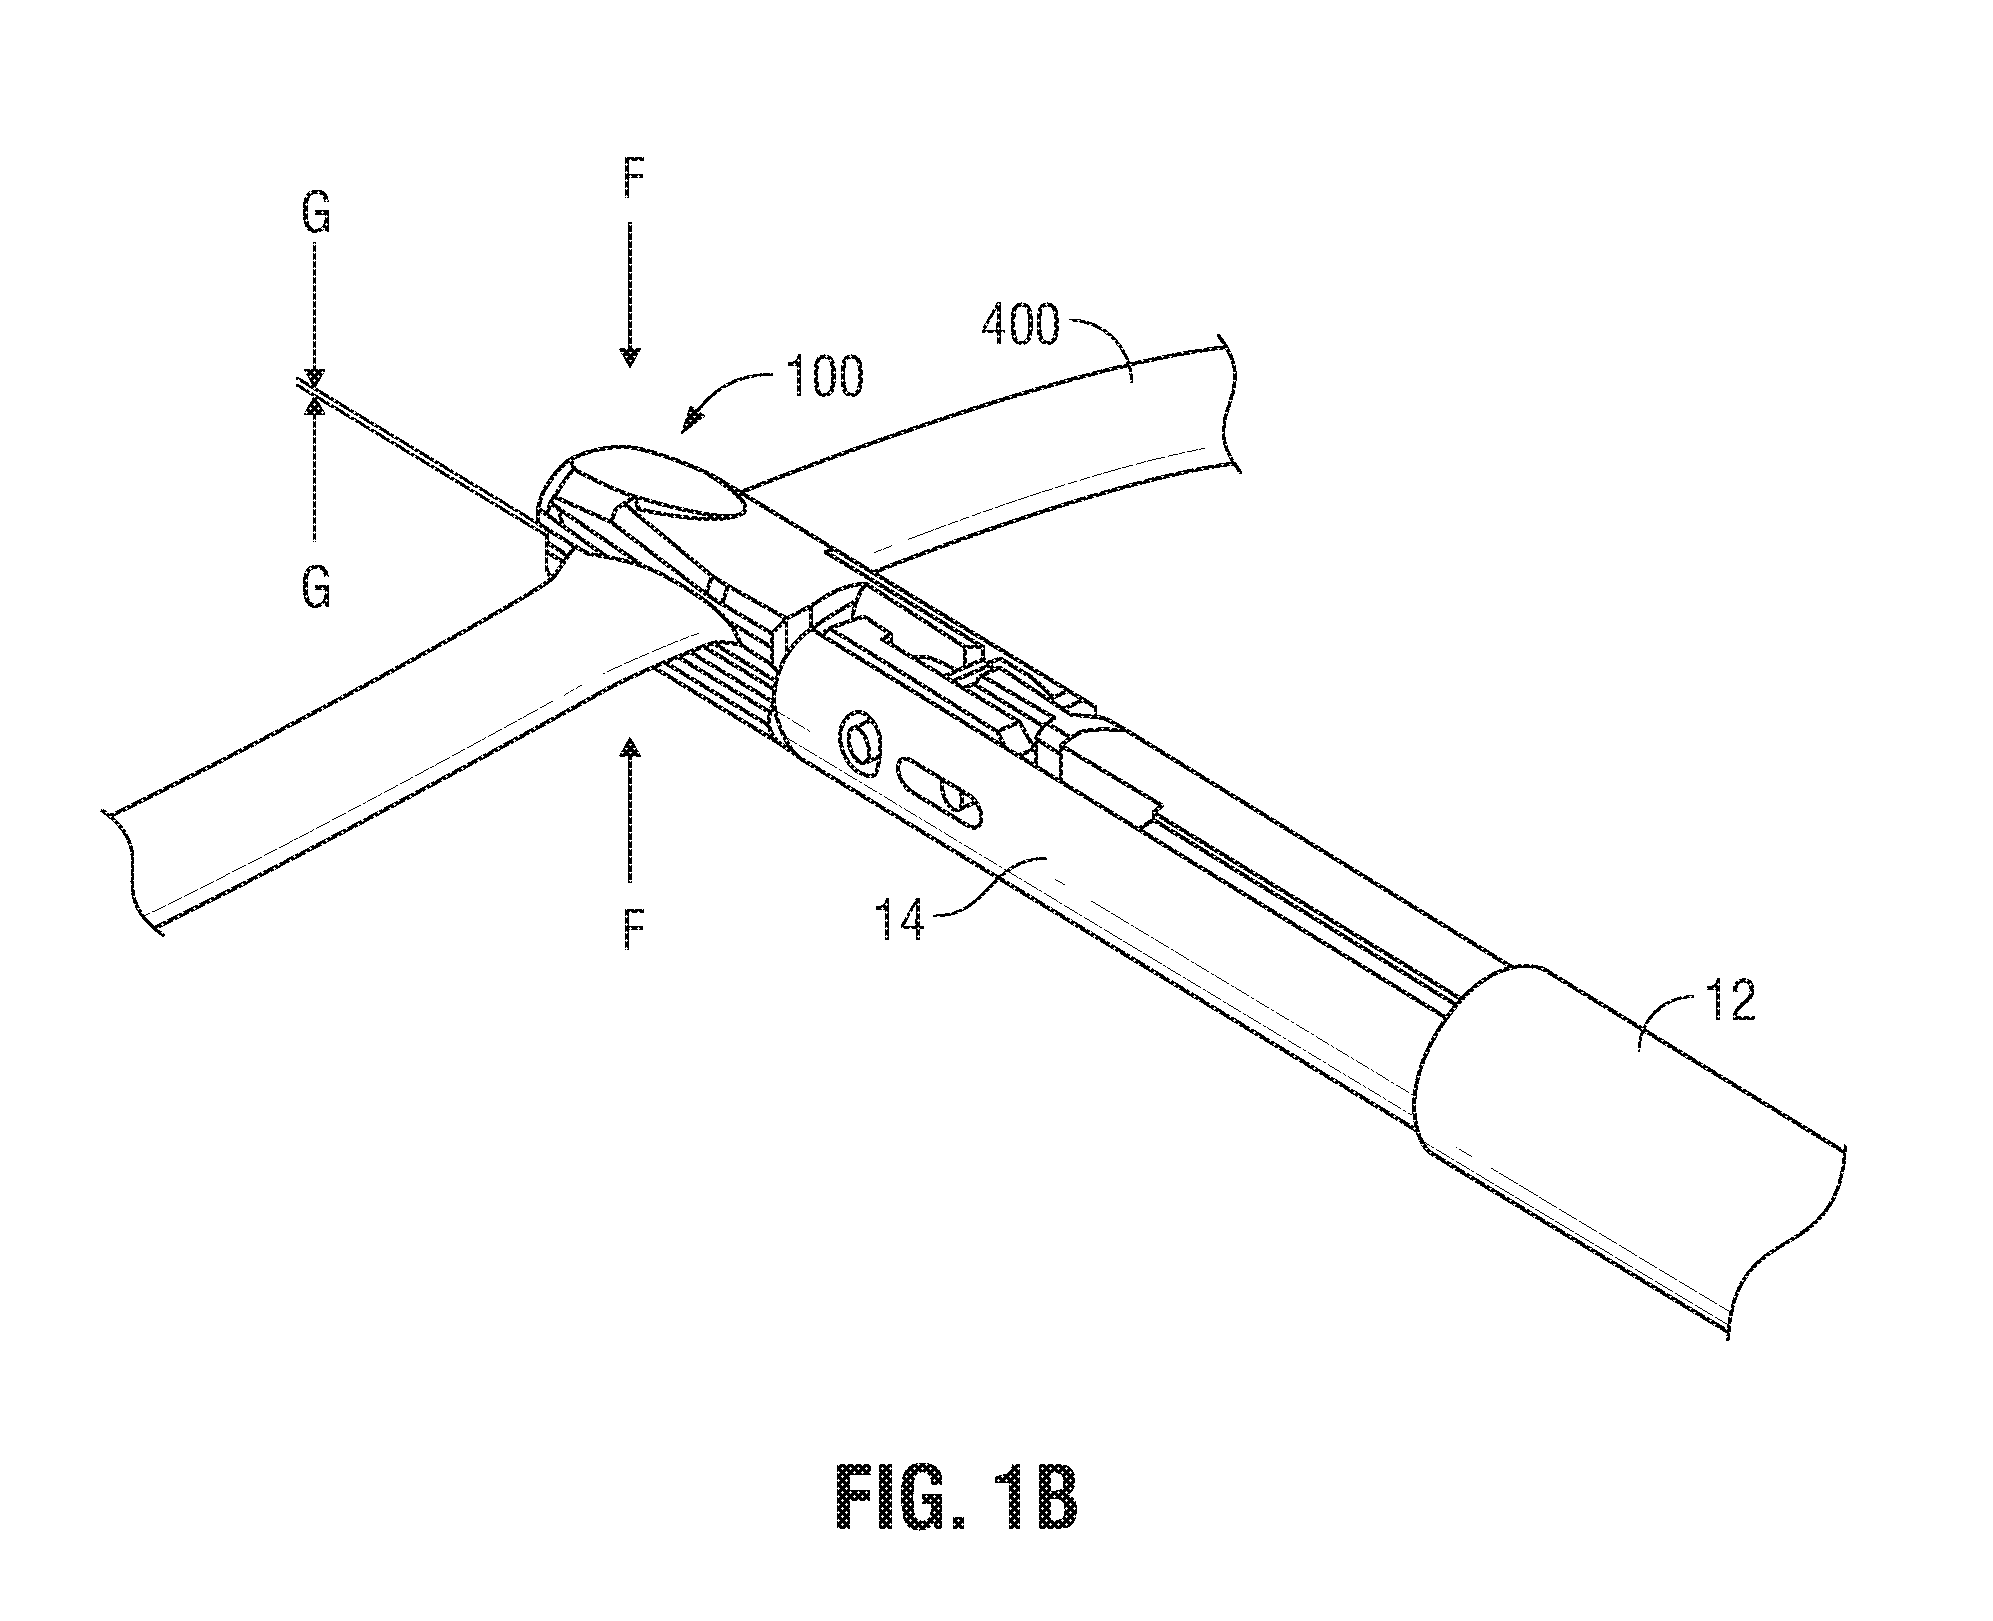 Systems and methods for controlling power in an electrosurgical generator